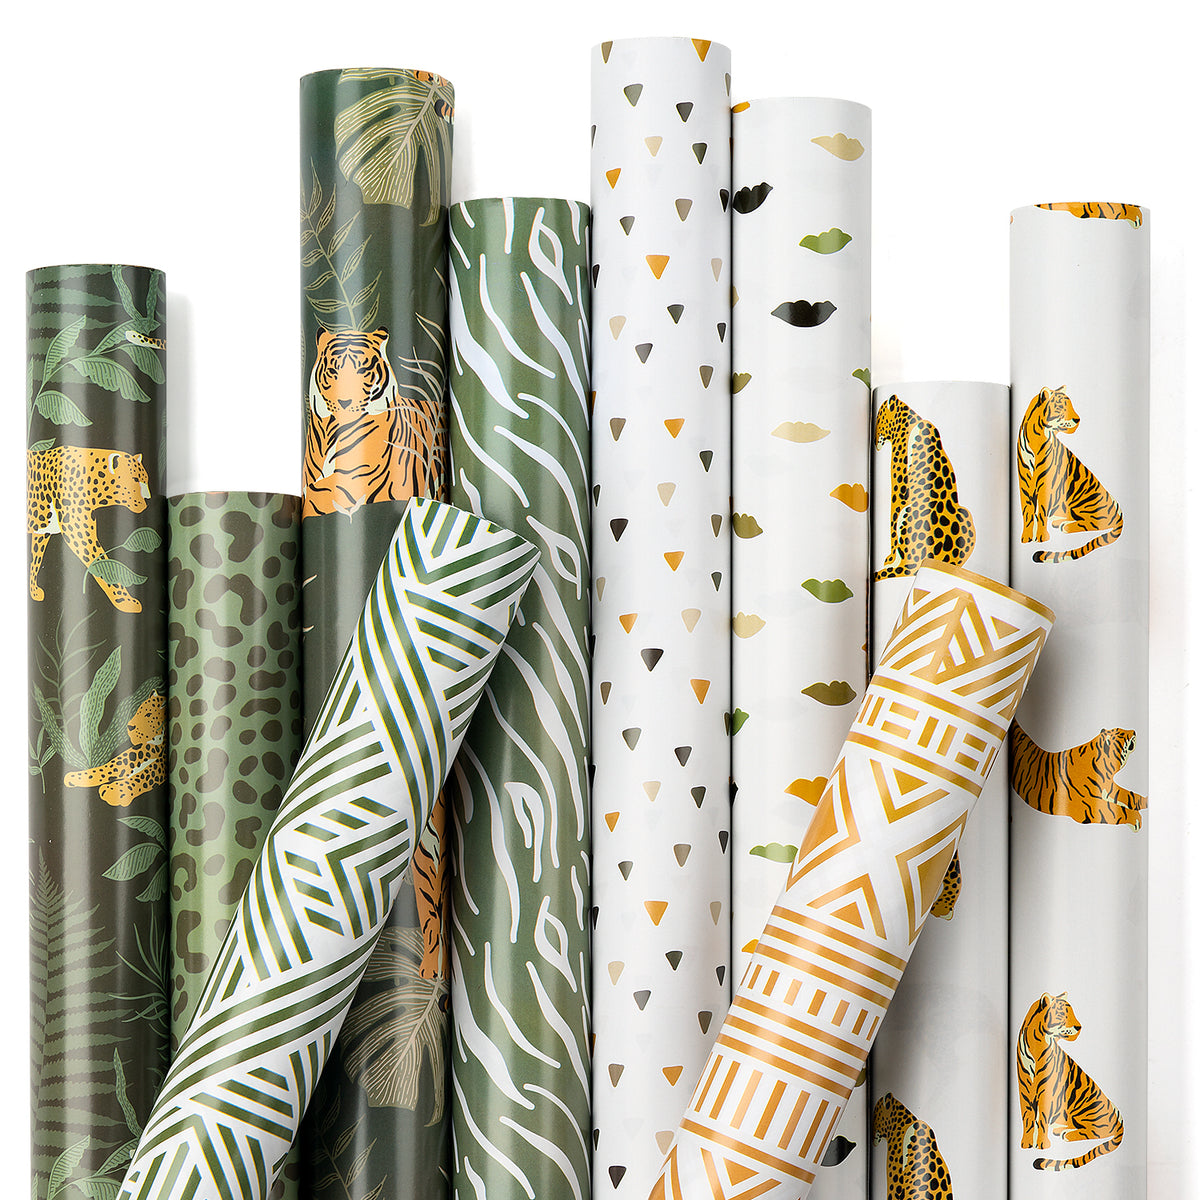 Wrapaholic Black & Gold Gift Wrapping Paper - 4 Rolls/ Set